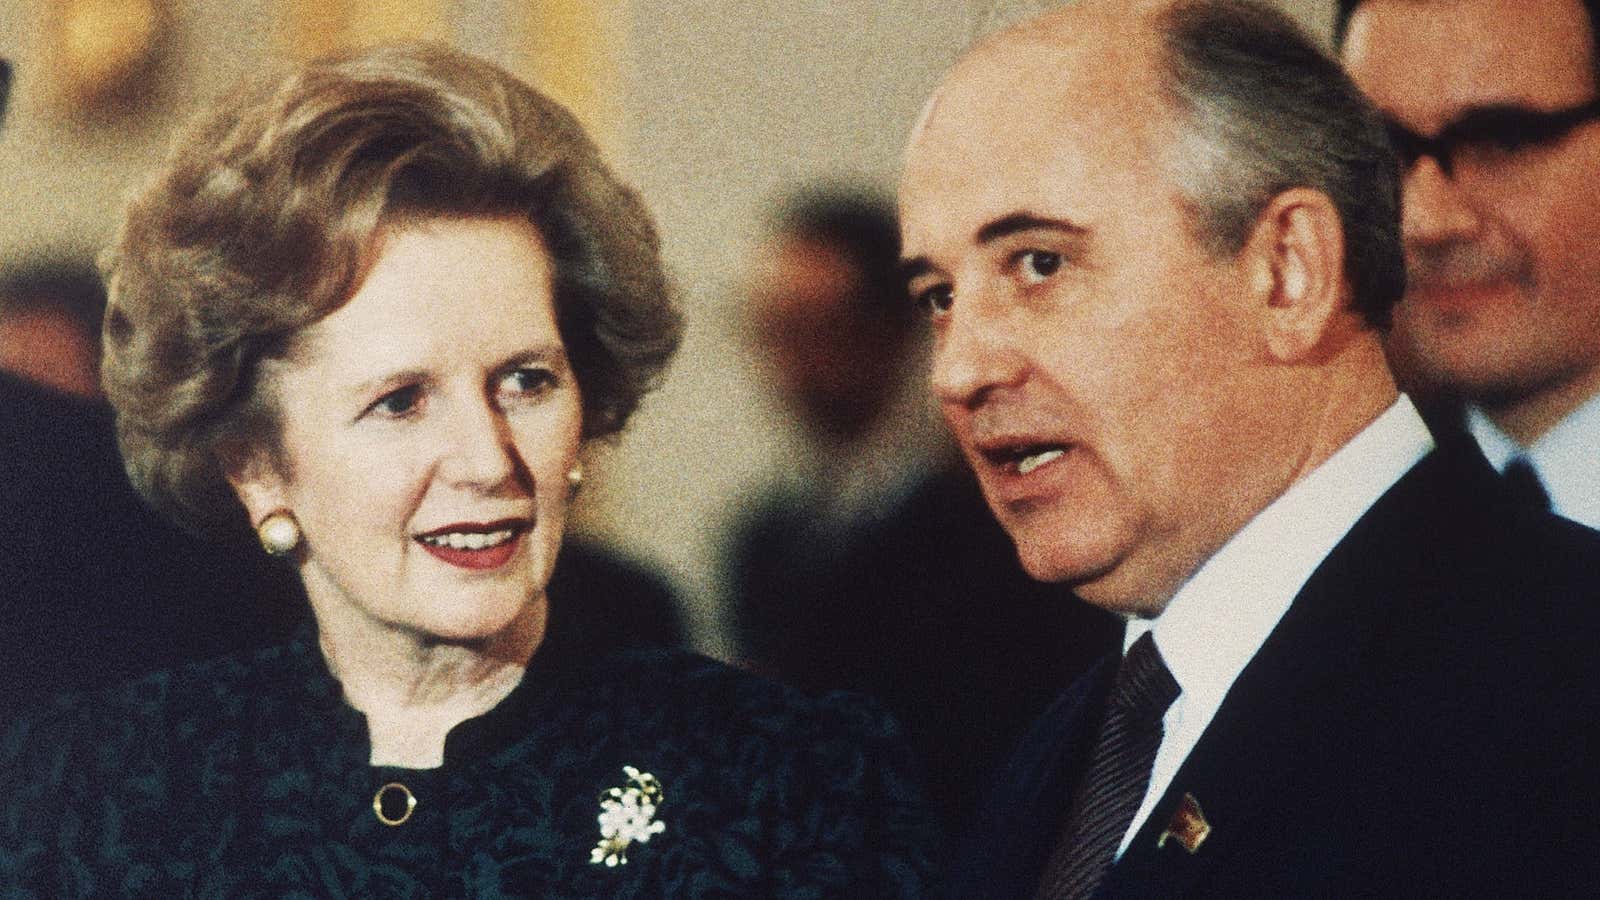 Thatcher and Gorbachev, doing business.